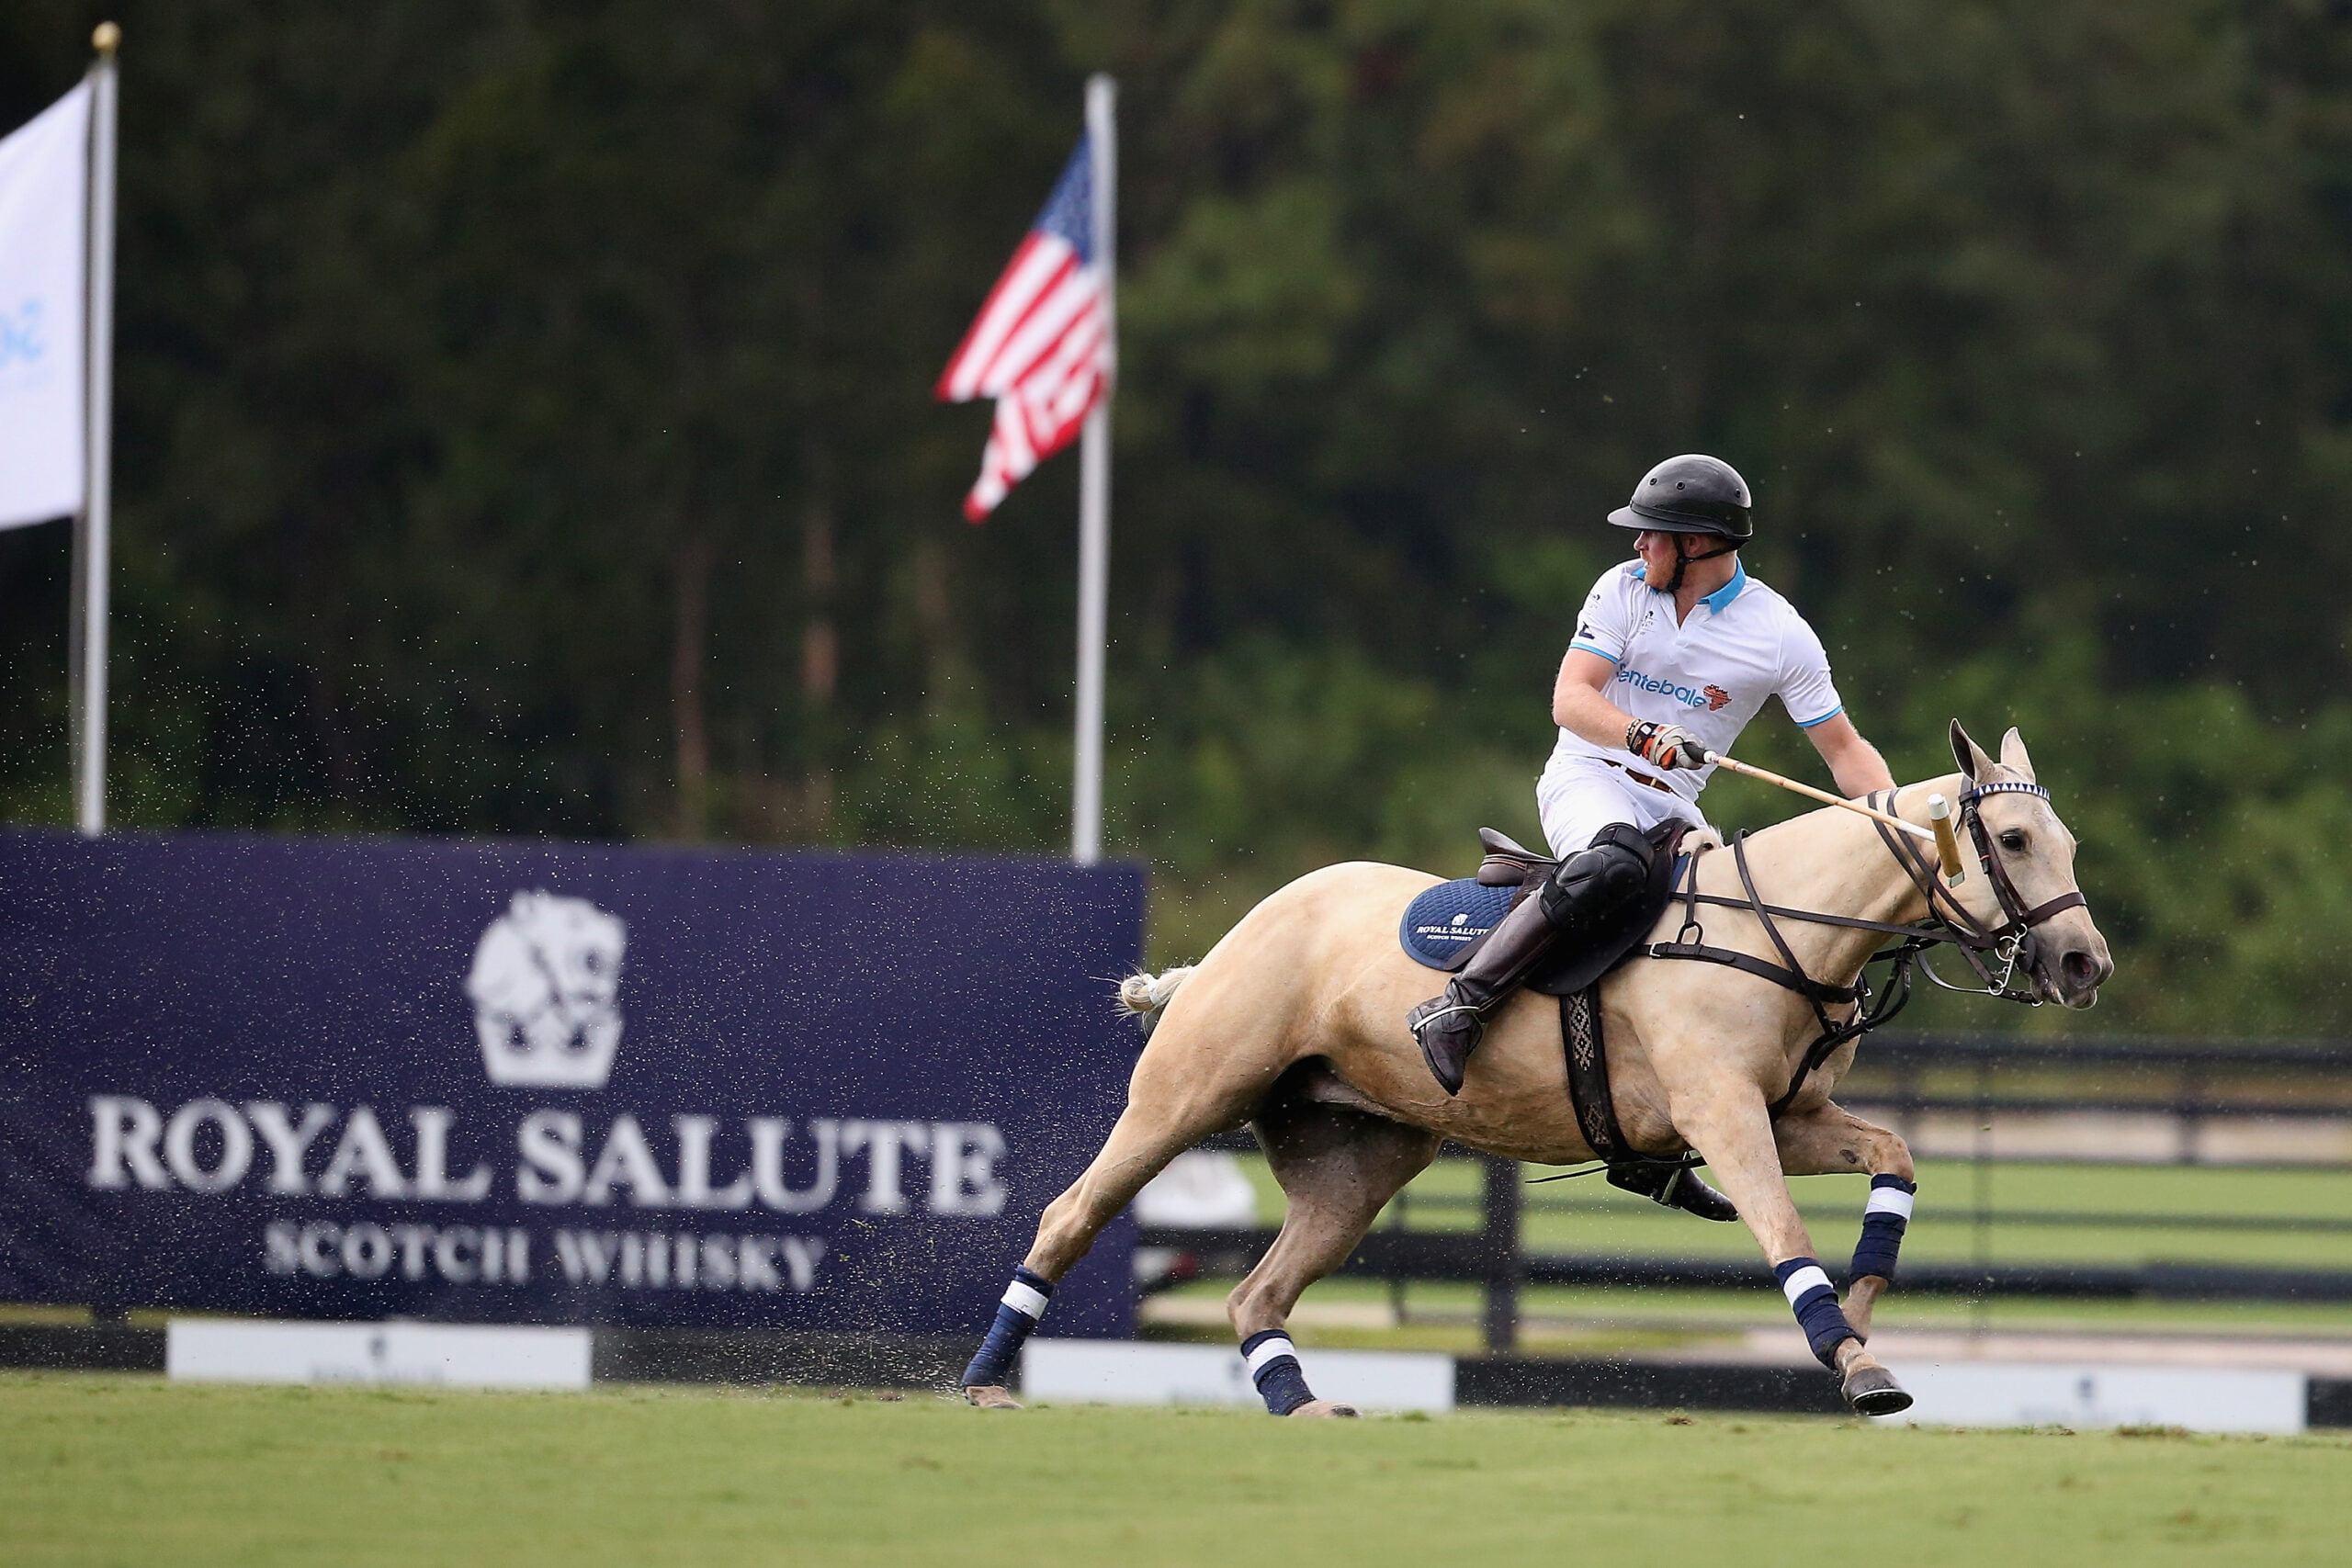 Sentebale Royal Salute Polo Cup In Palm Beach With Prince Harry - Polo